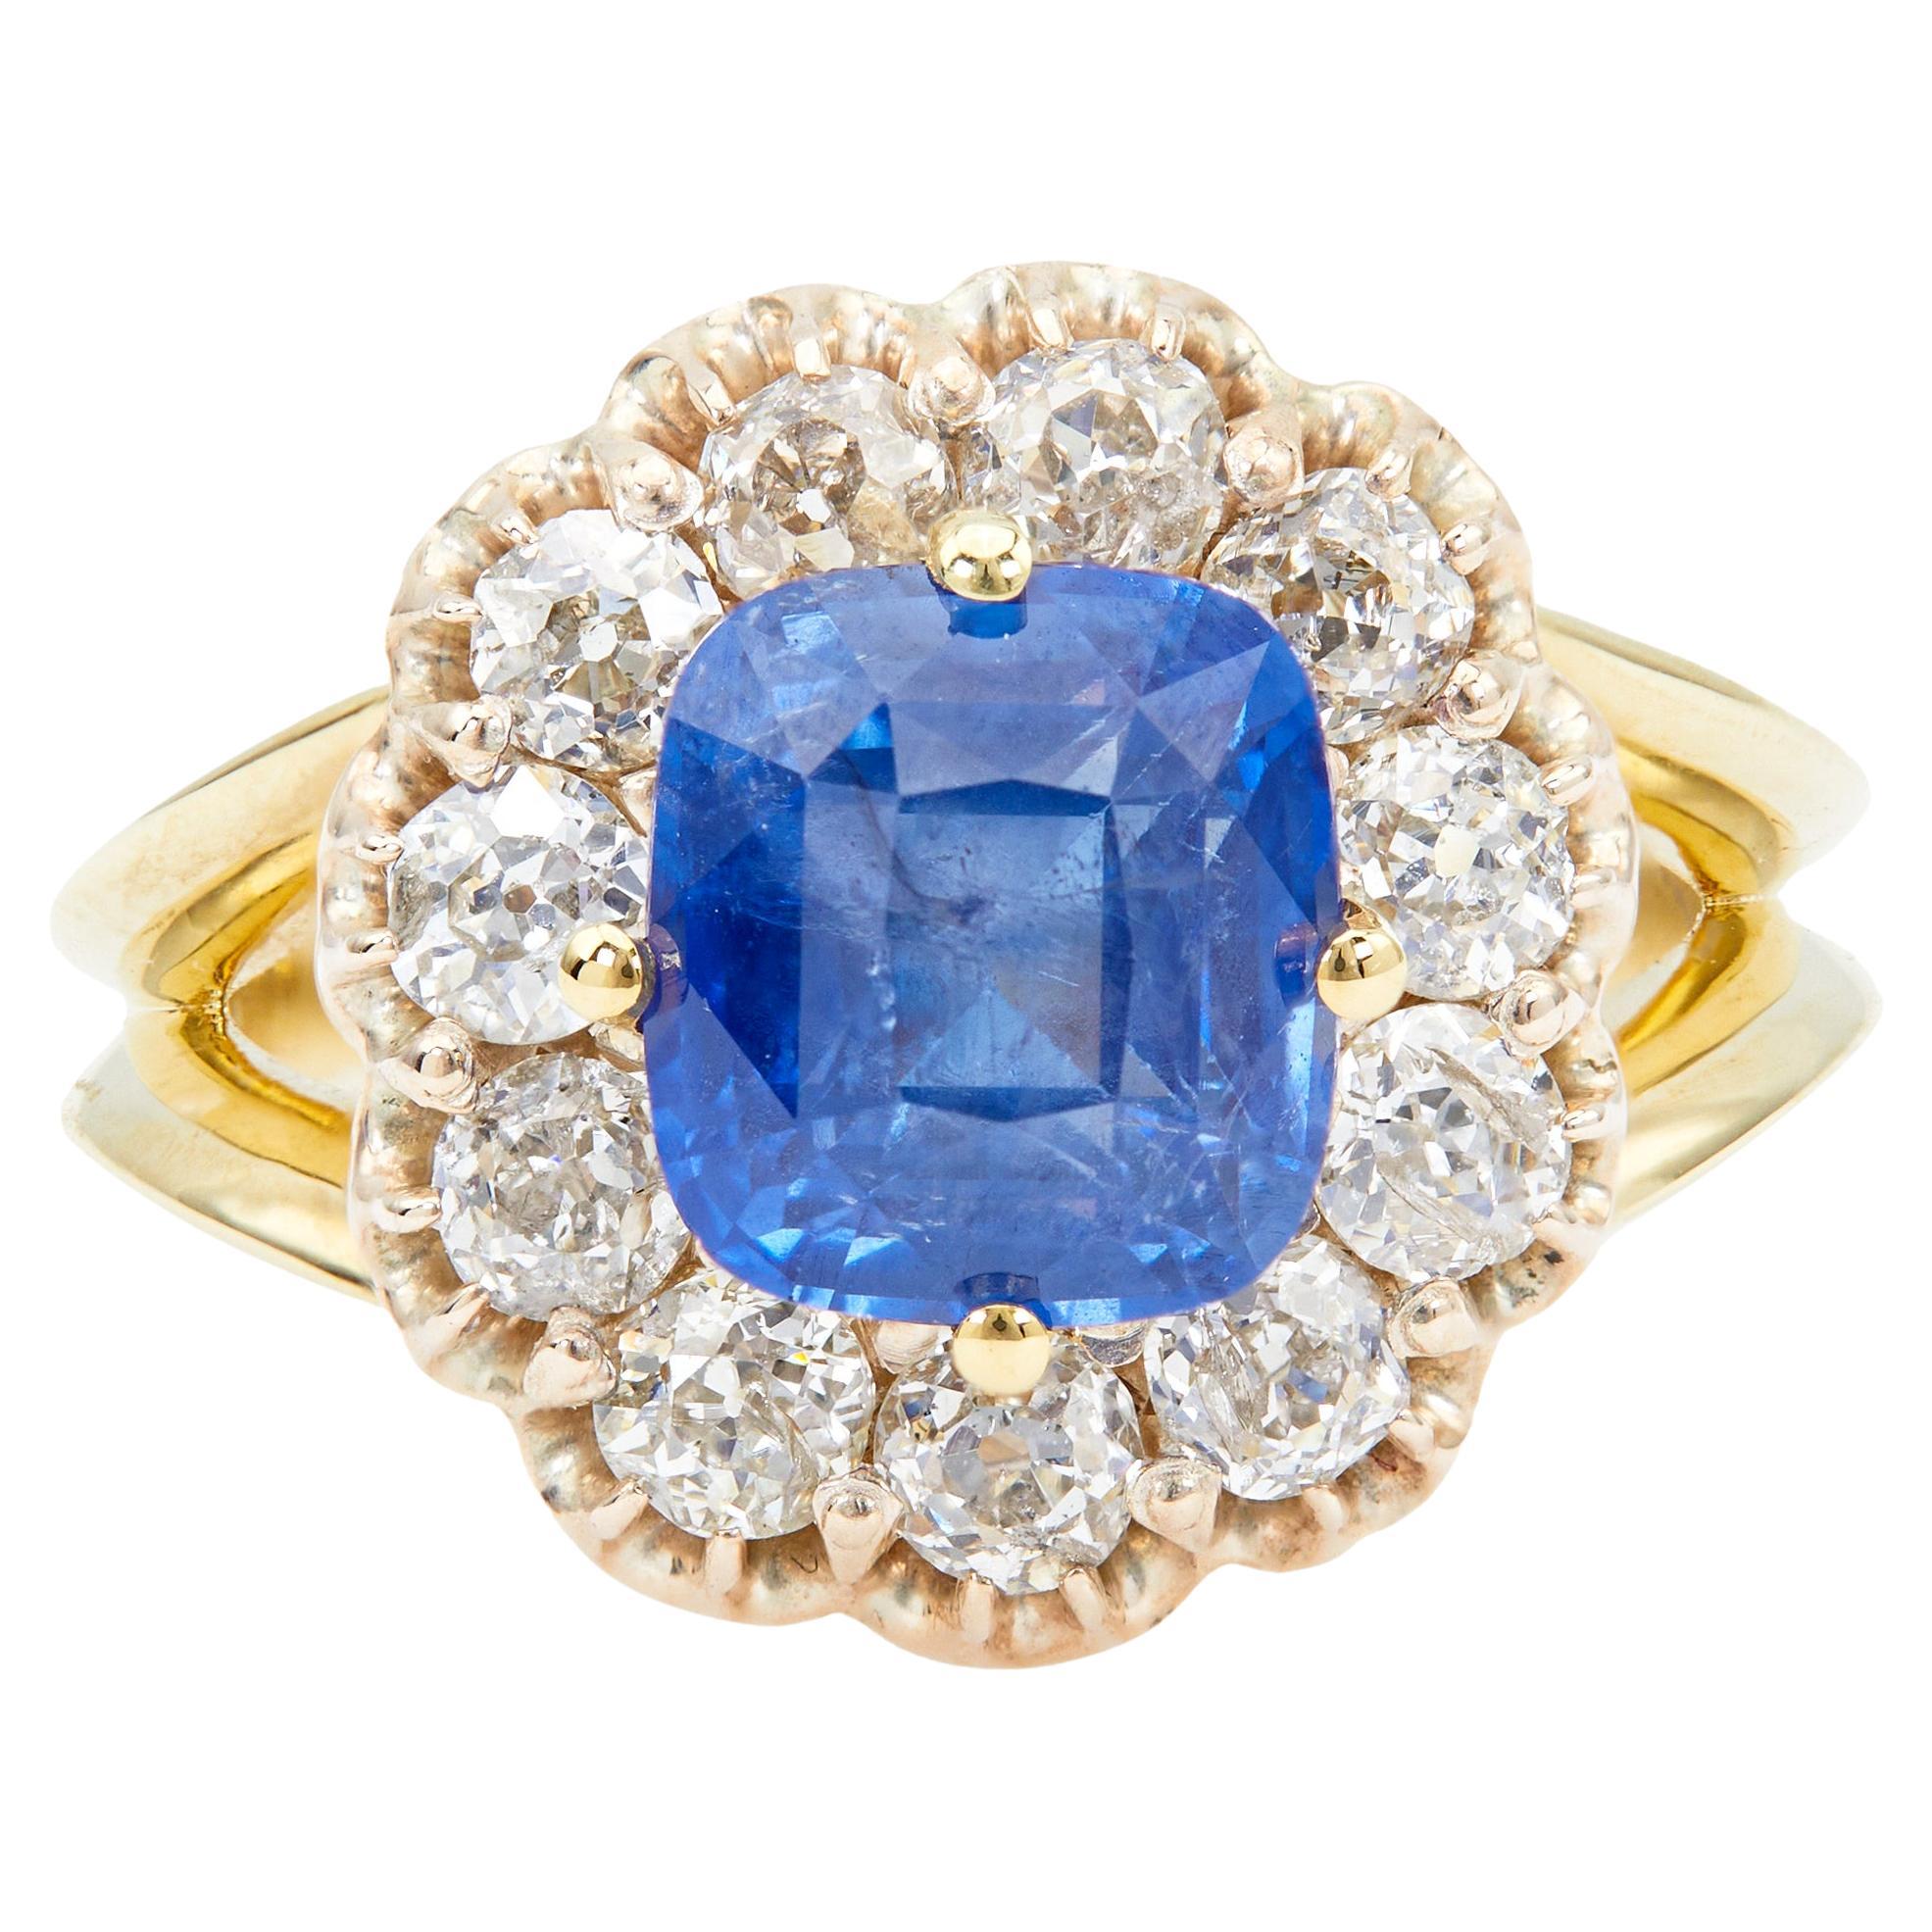 Late Victorian GIA 3.33 Carat Ceylon Sapphire and Diamond 14k Gold Cluster Ring